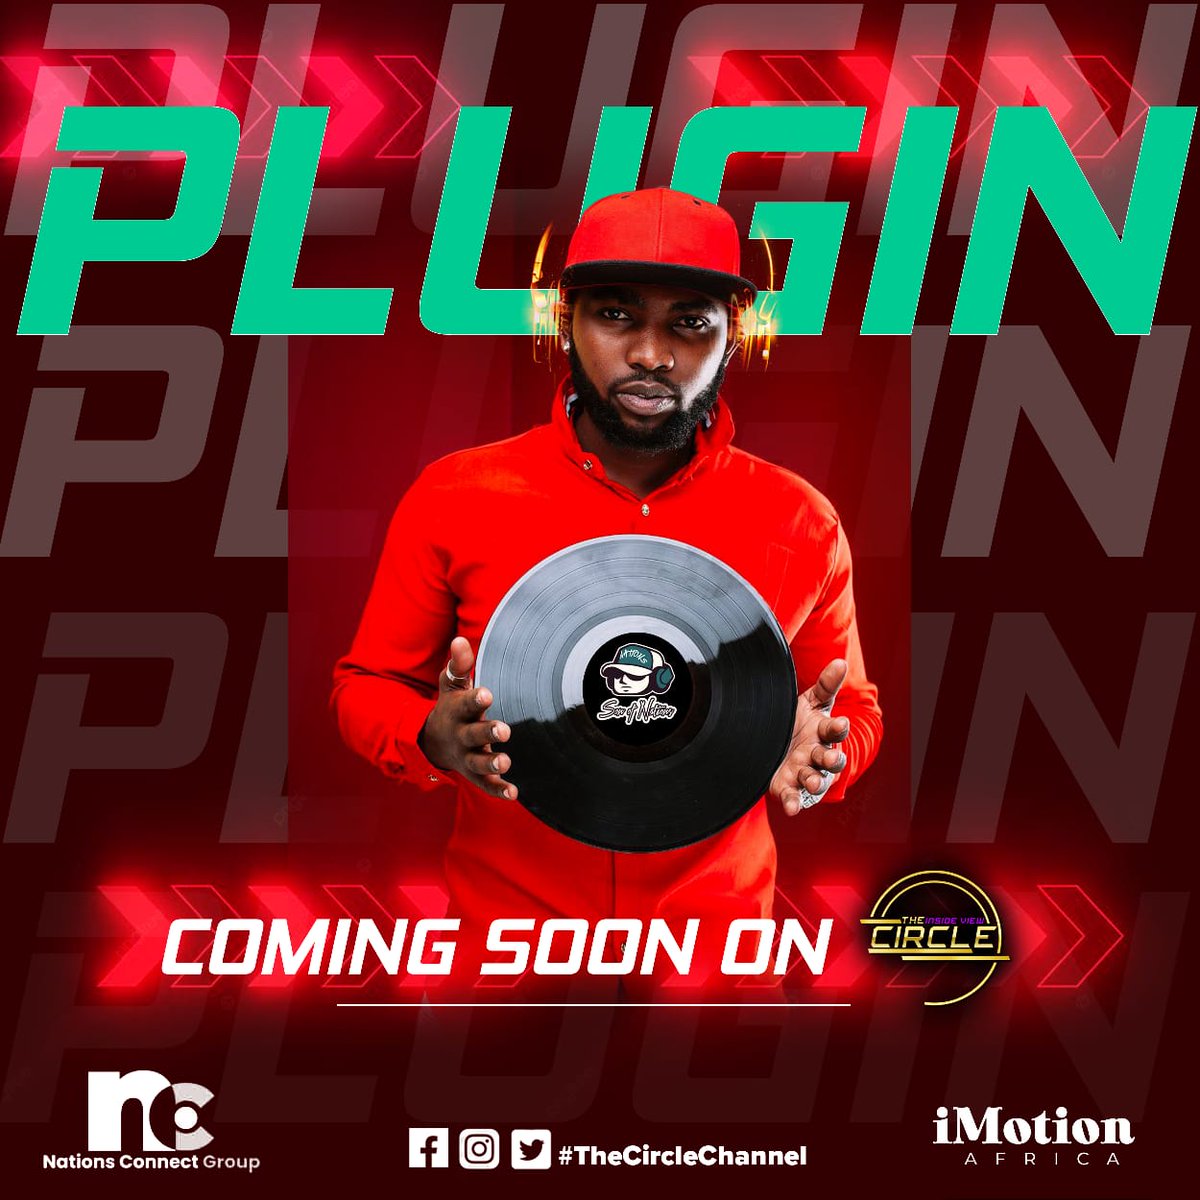 🔌 Exciting news! Join us on #TheCircleChannel for the premiere of 'The Plugin' with Son Of Nations on January 24th! 🎶 Dive into a deeper realm through music and experience a journey like never before. #ThePlugin #SonOfNations 🔊✨